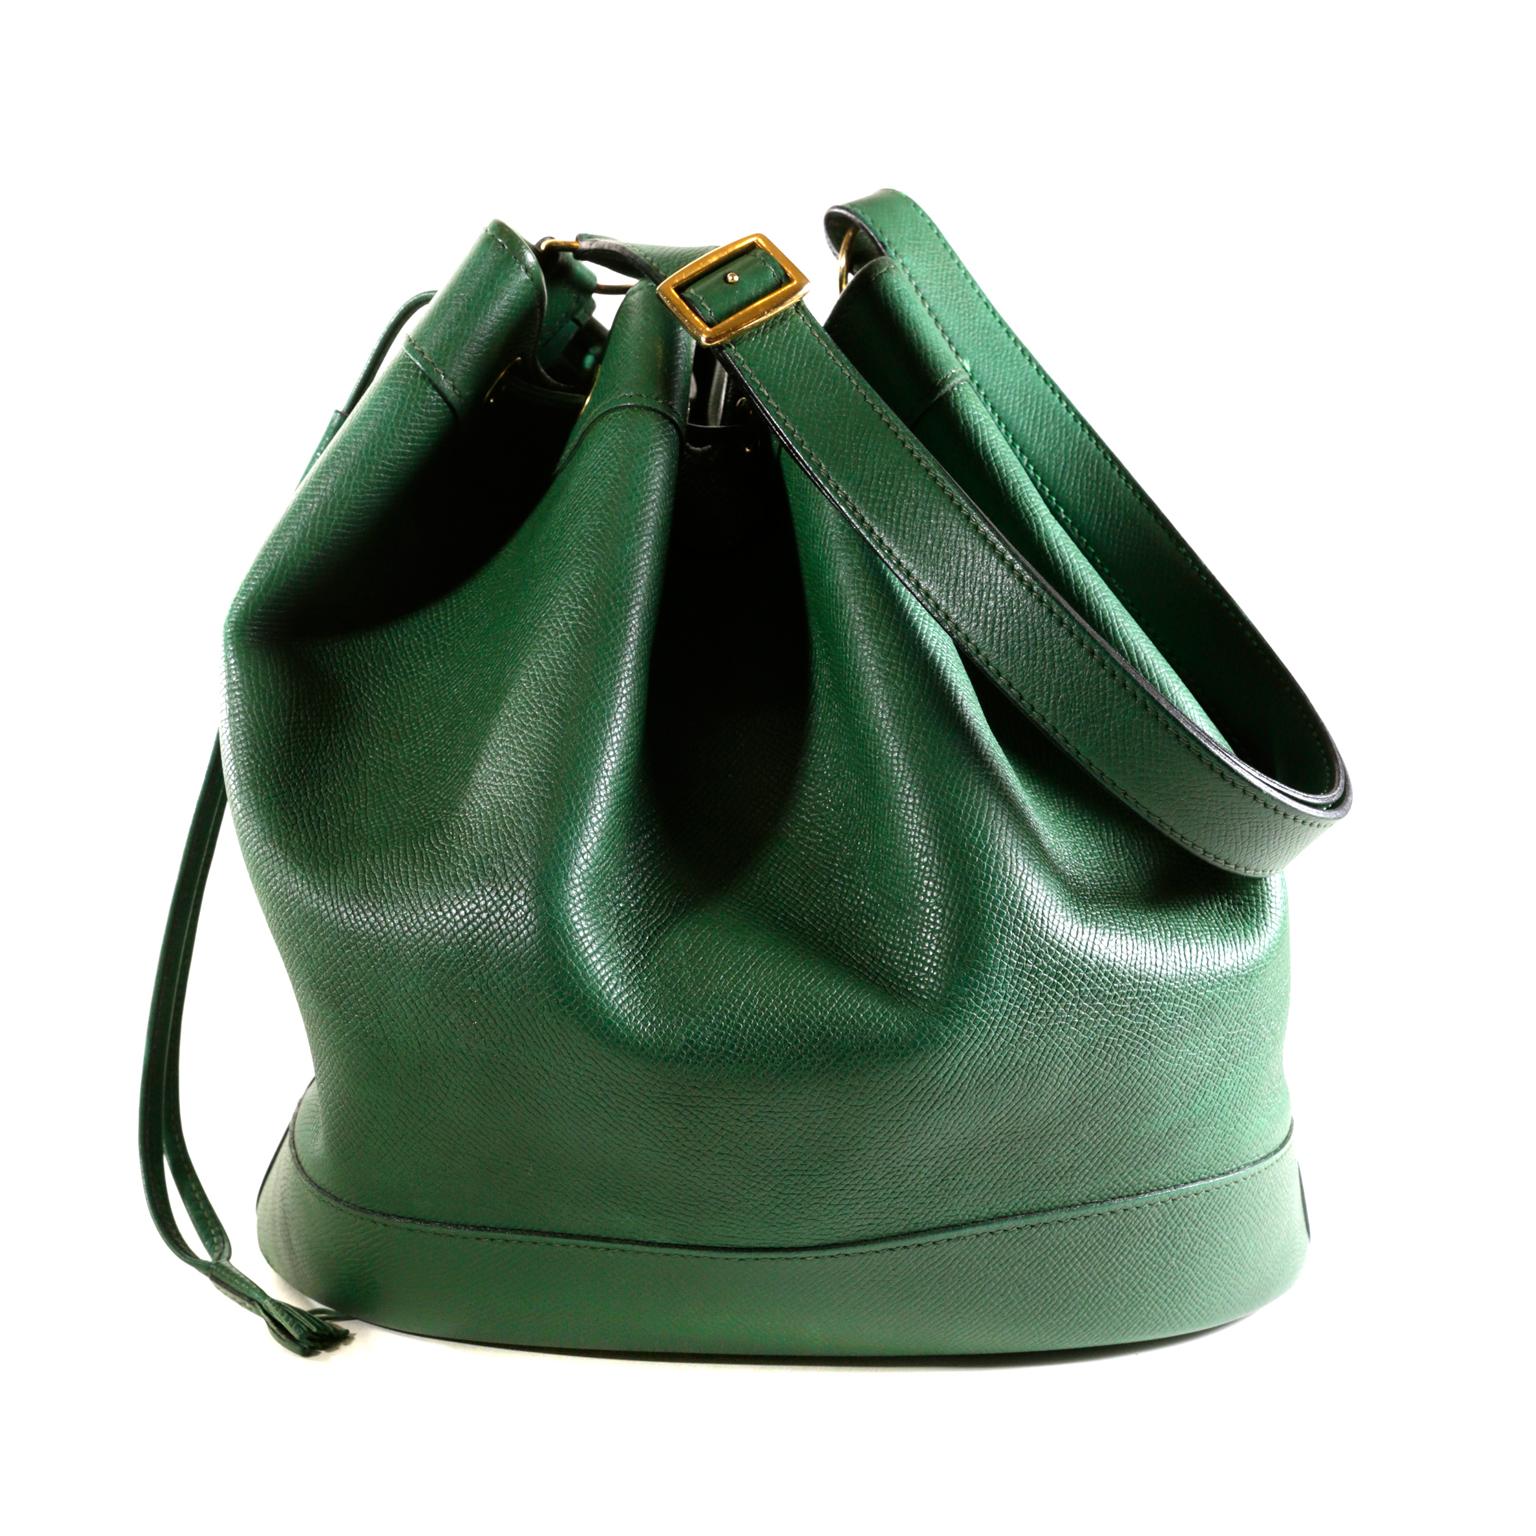 Hermès Bengal Green Epsom Leather Vintage Market Bag - EXCELLENT PLUS Condition
  The classic silhouette is a drawstring bucket bag; perfect for every day enjoyment. 
Deep green textured and durable Epsom leather bucket bag holds everything easily.